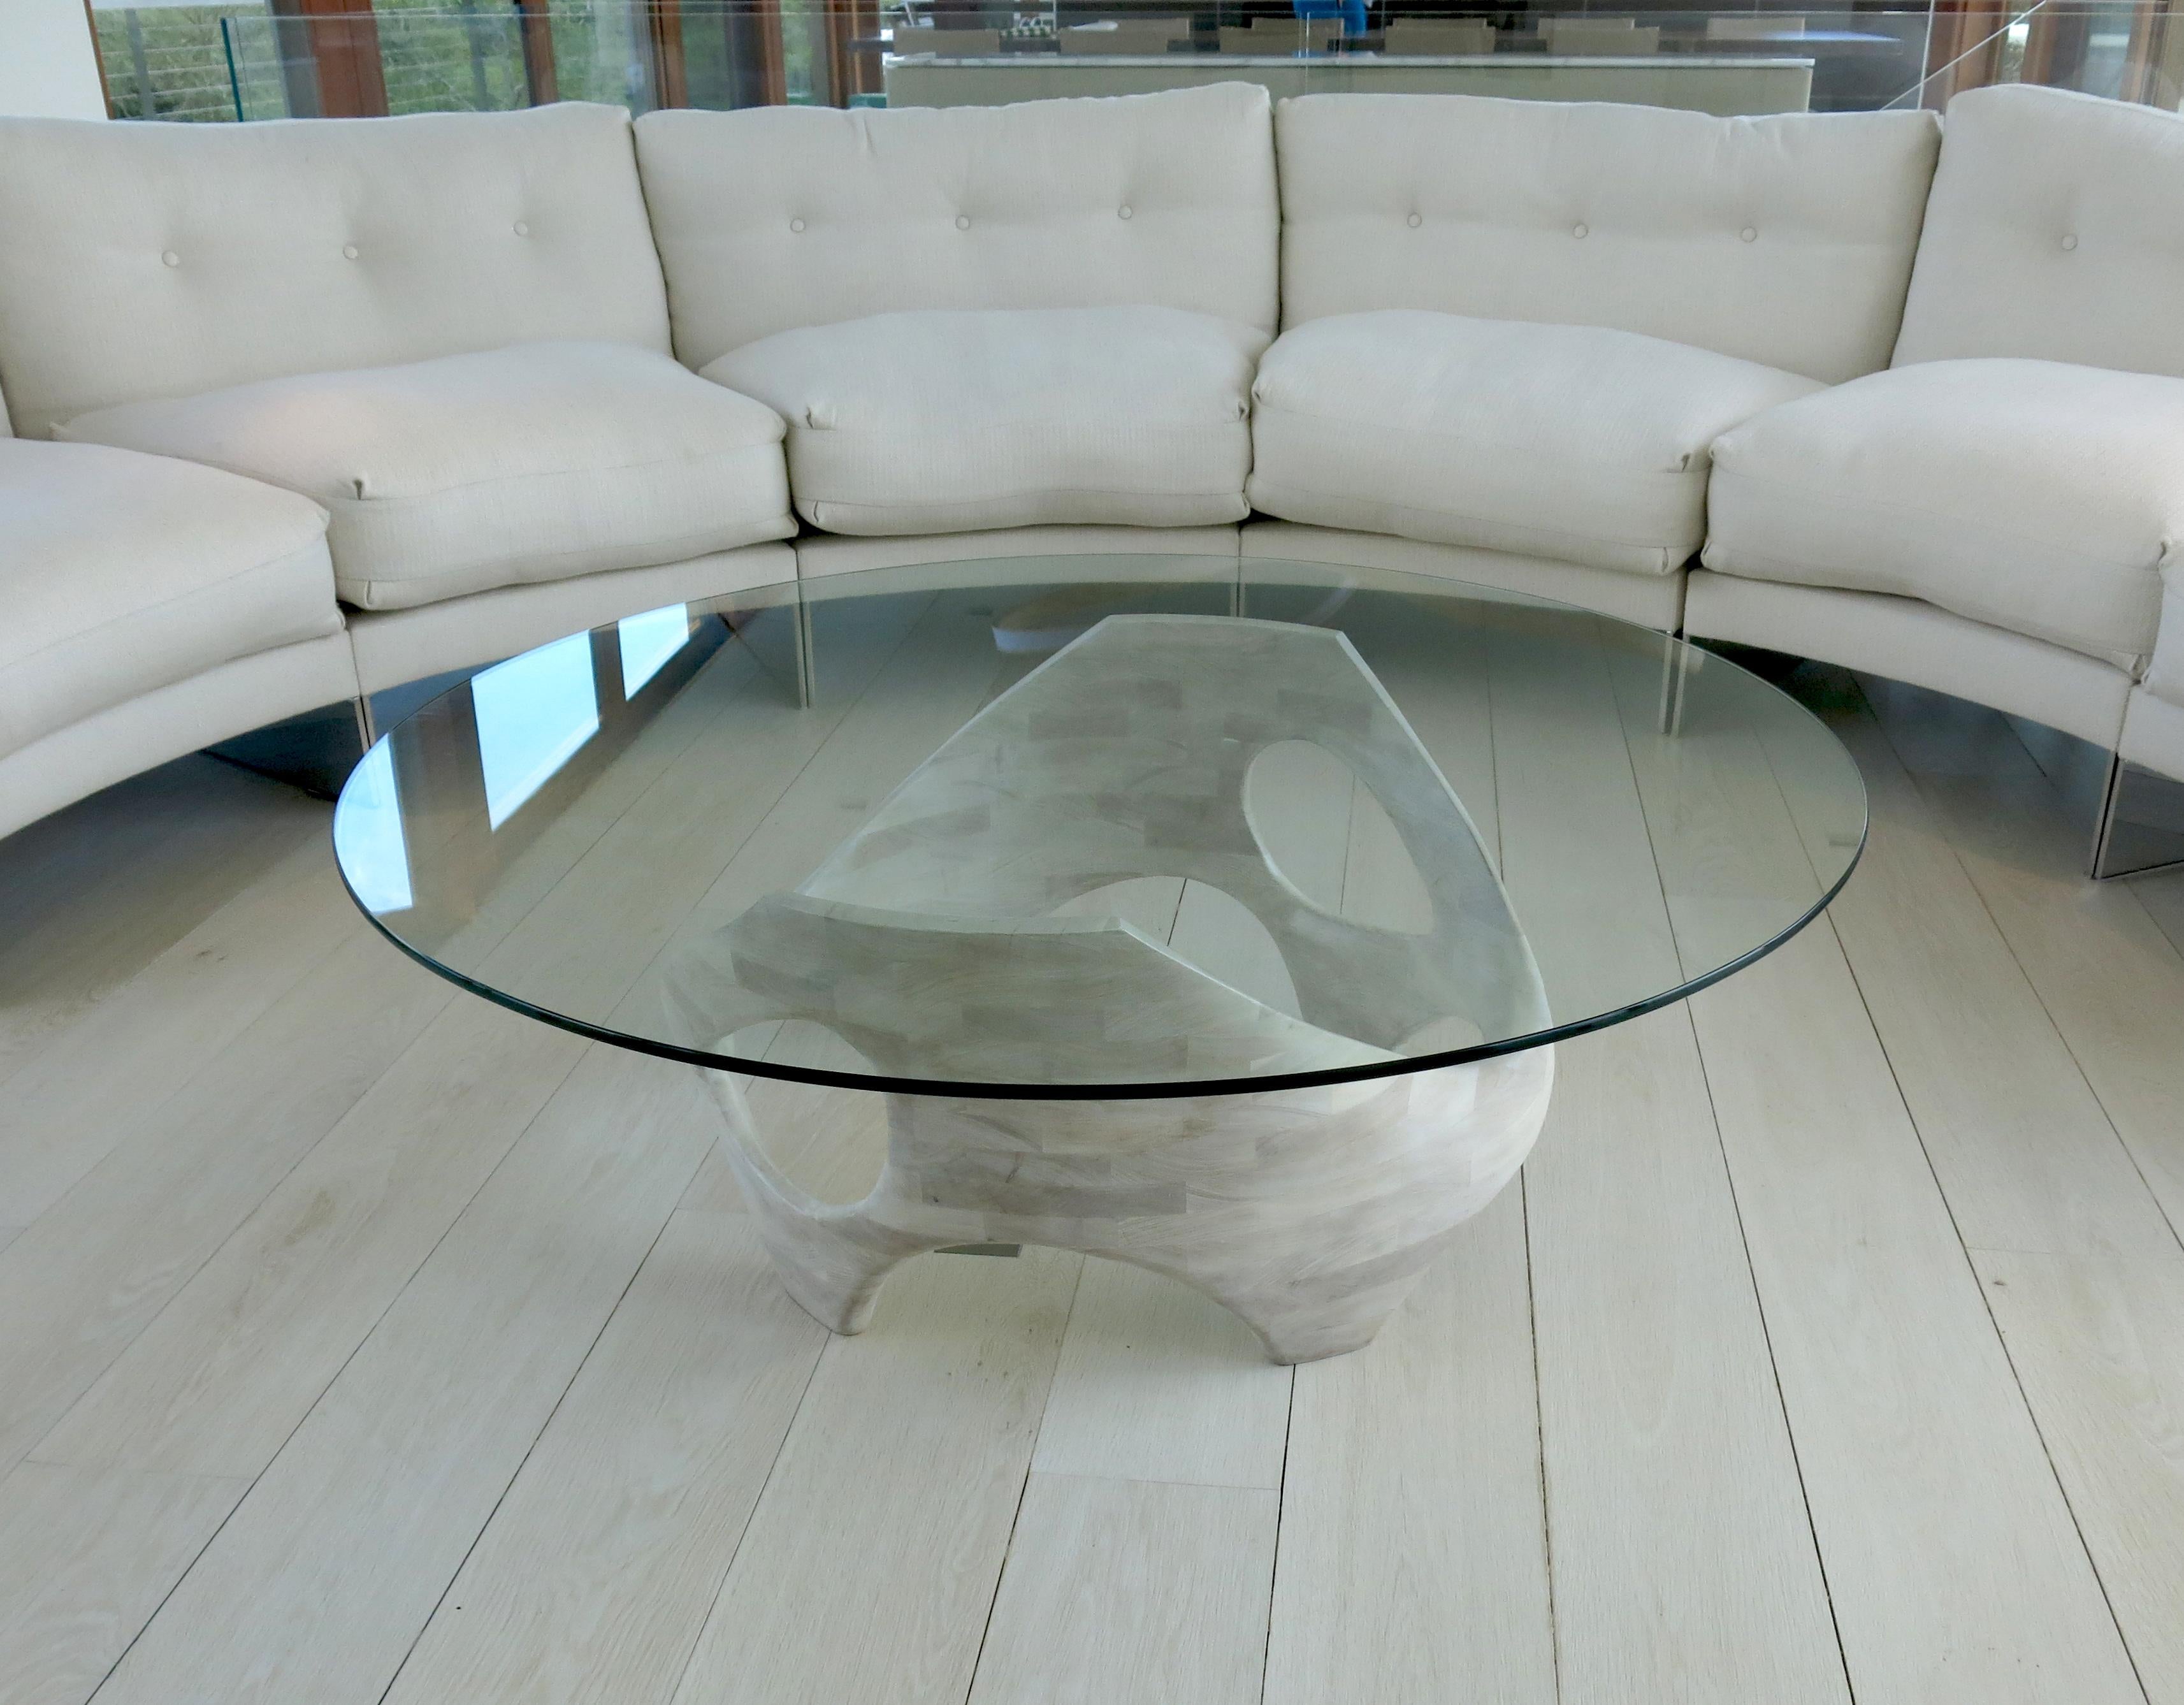 N2 coffee table by Aaron Scott
Dimensions: D 122 x W 122 x H 41 cm
Materials: bleached cherry, Glass.
Also available in other woods: bleached walnut, walnut. 


Brooklyn-based designer Aaron Scott was raised in the mountains and forests of